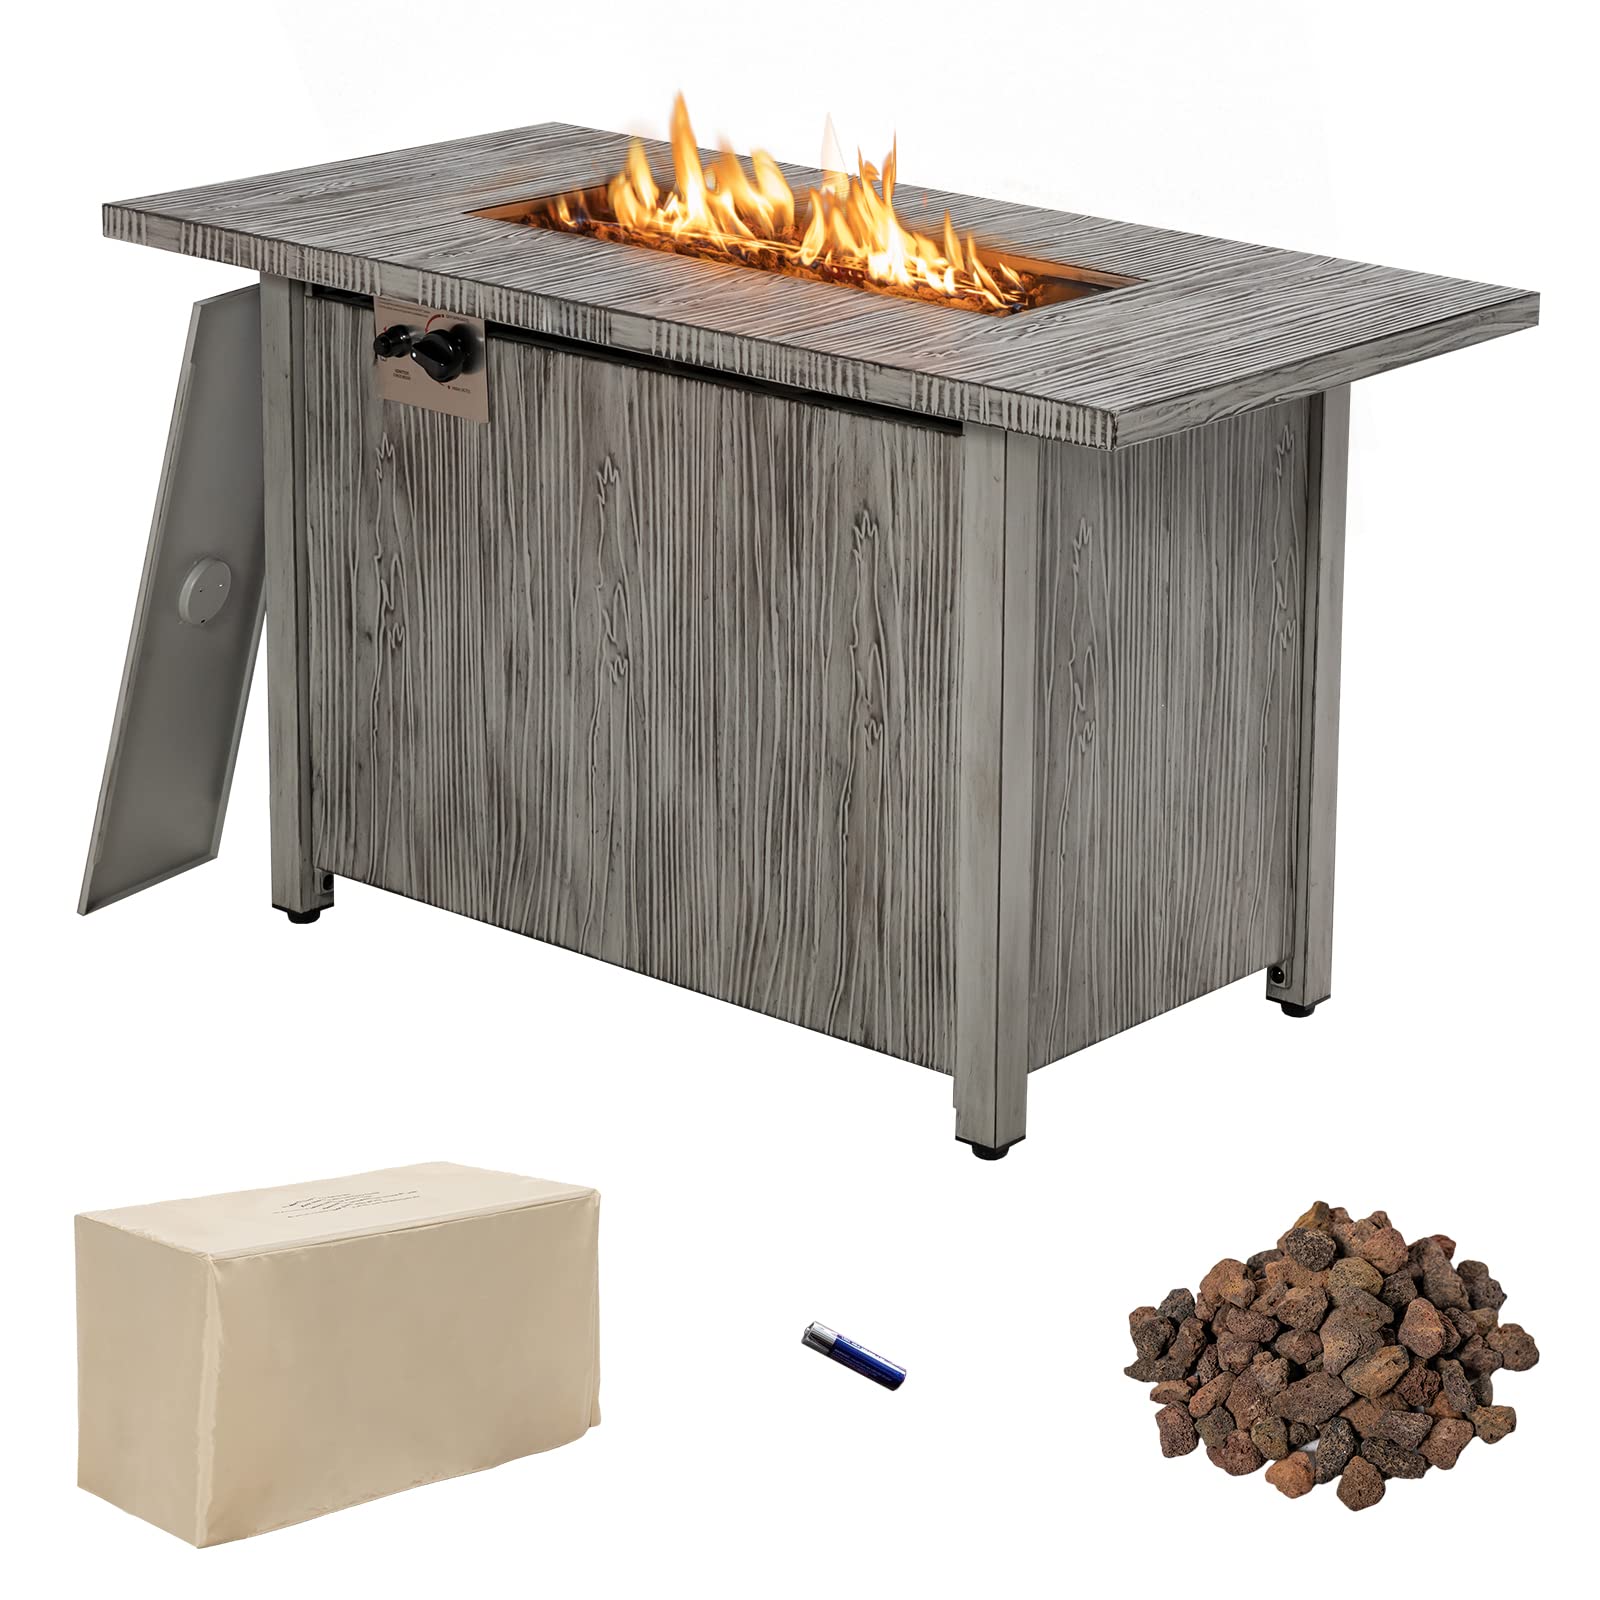 Giantex Outdoor Fire Pit Table - 43 Inch Propane Fire Pit